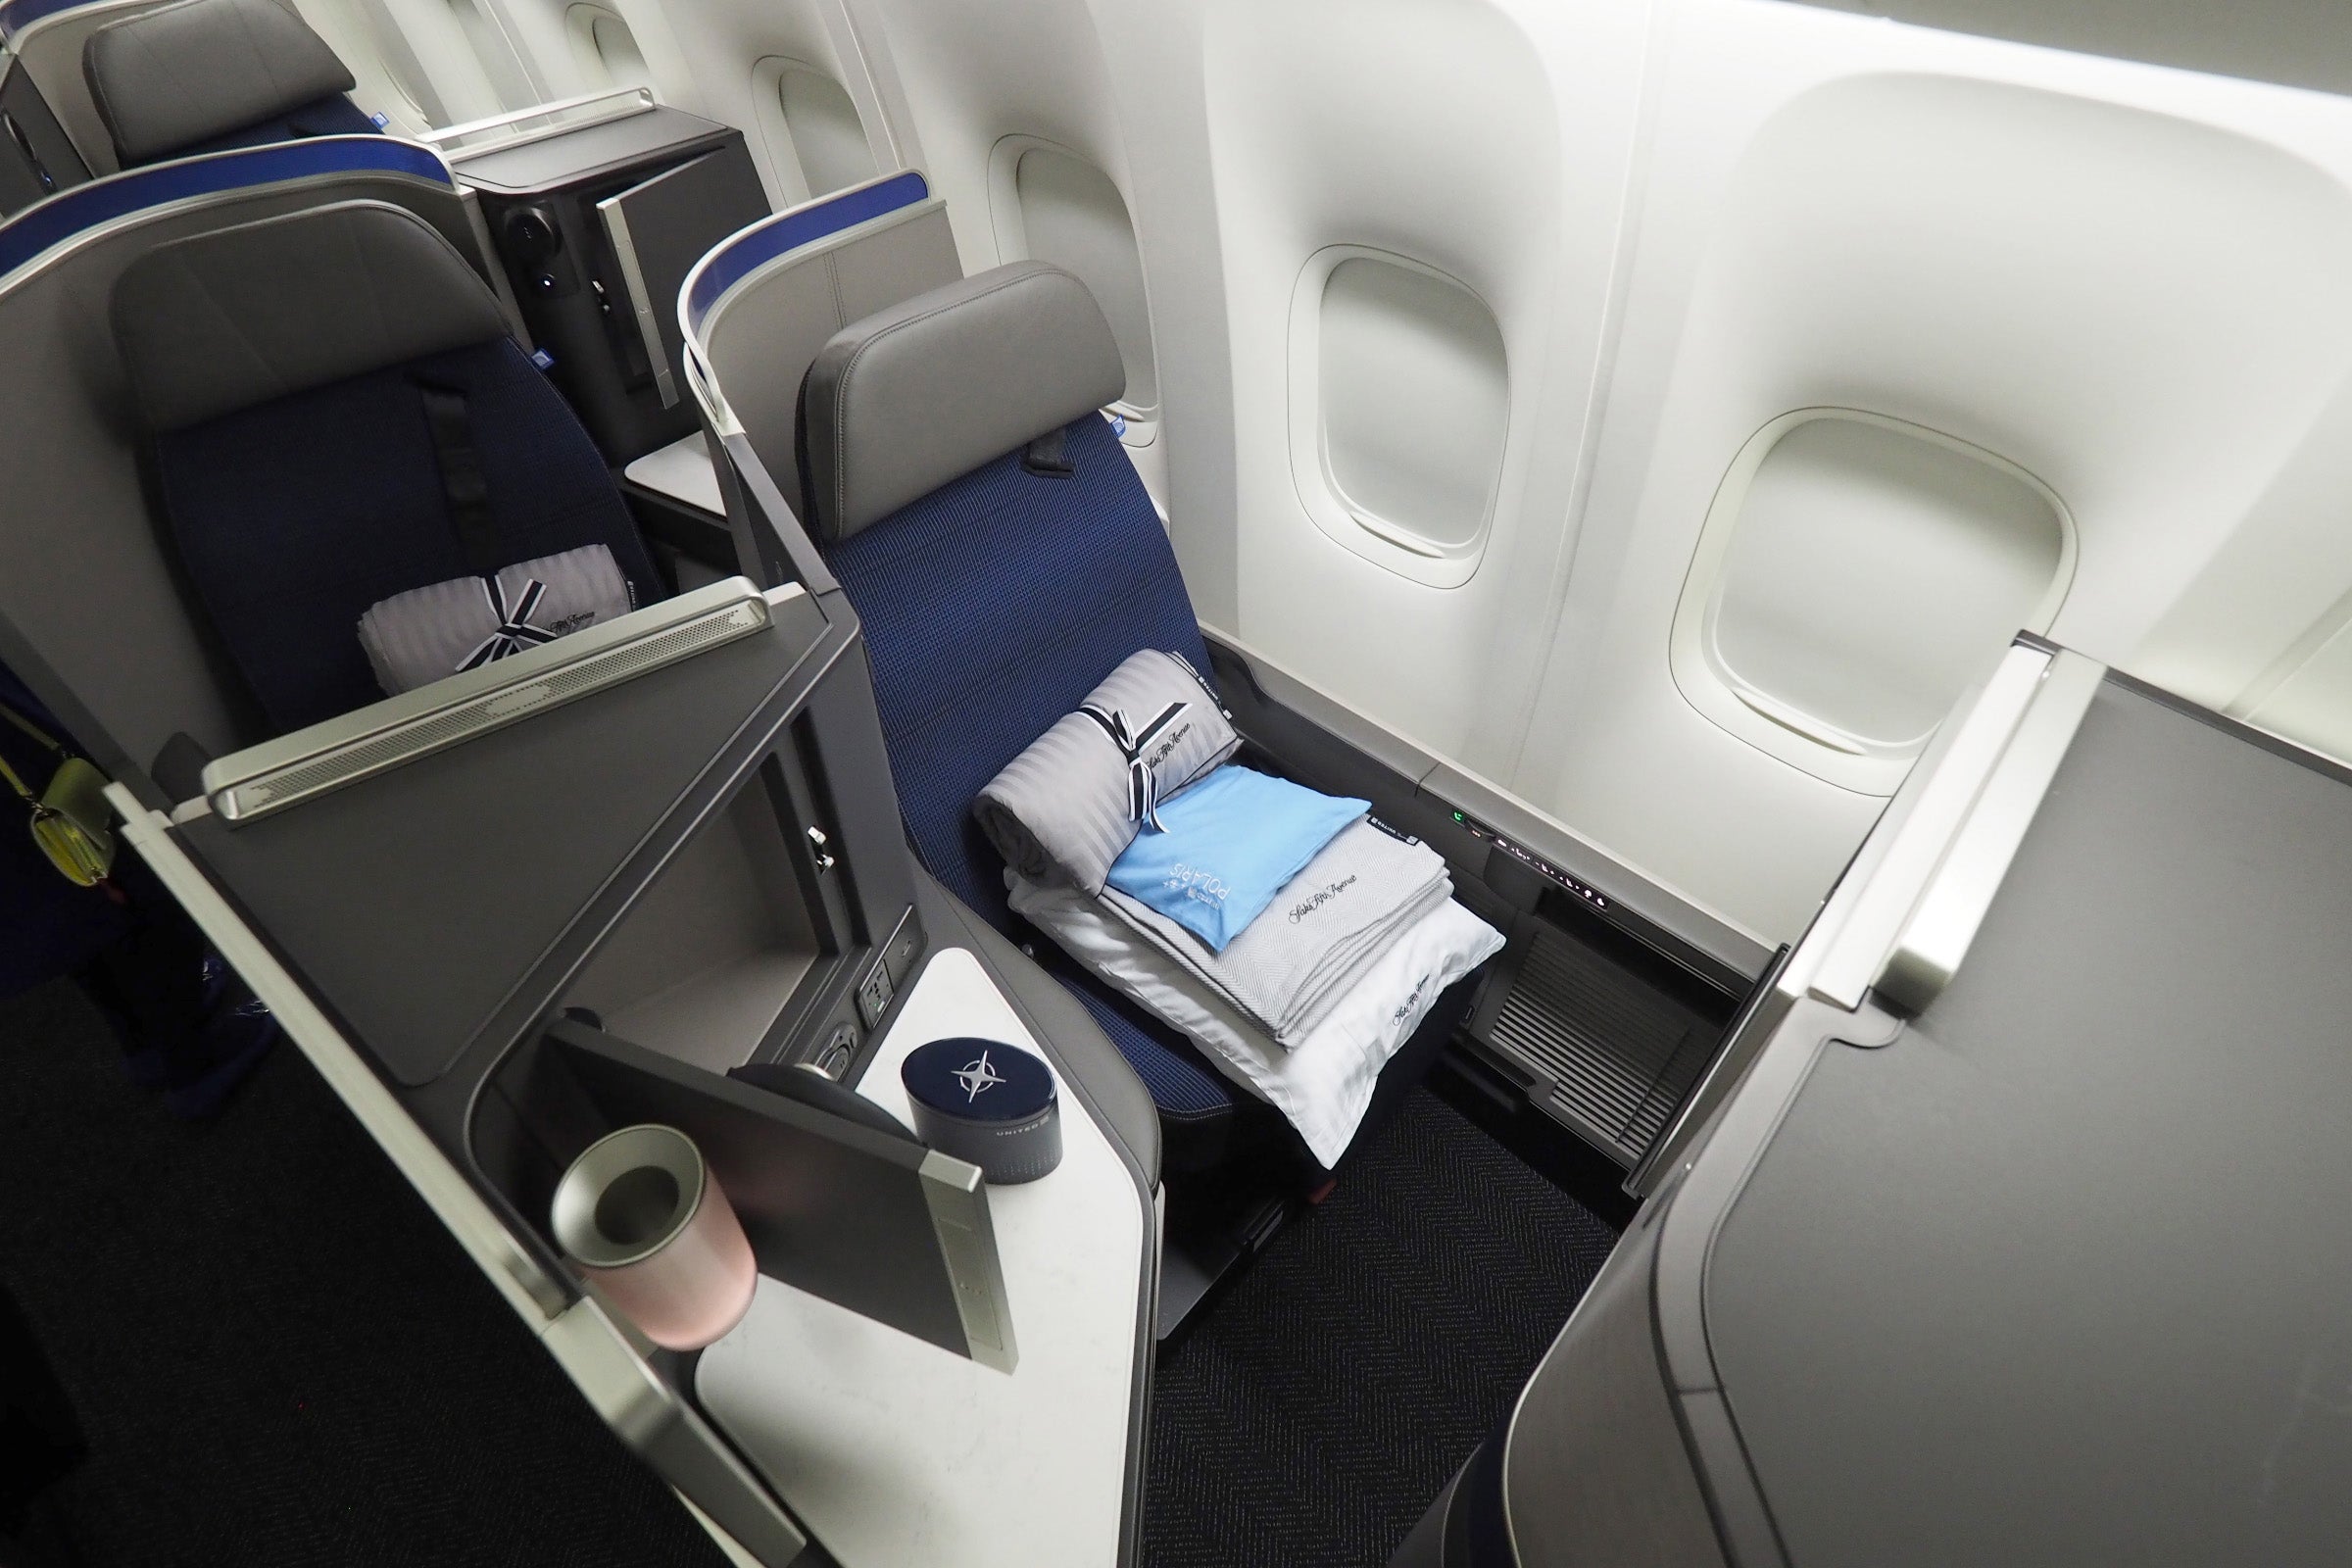 United's 787-10 will offer the new Polaris business-class seat. Boeing 777-200 (Photo by Zach Honig).